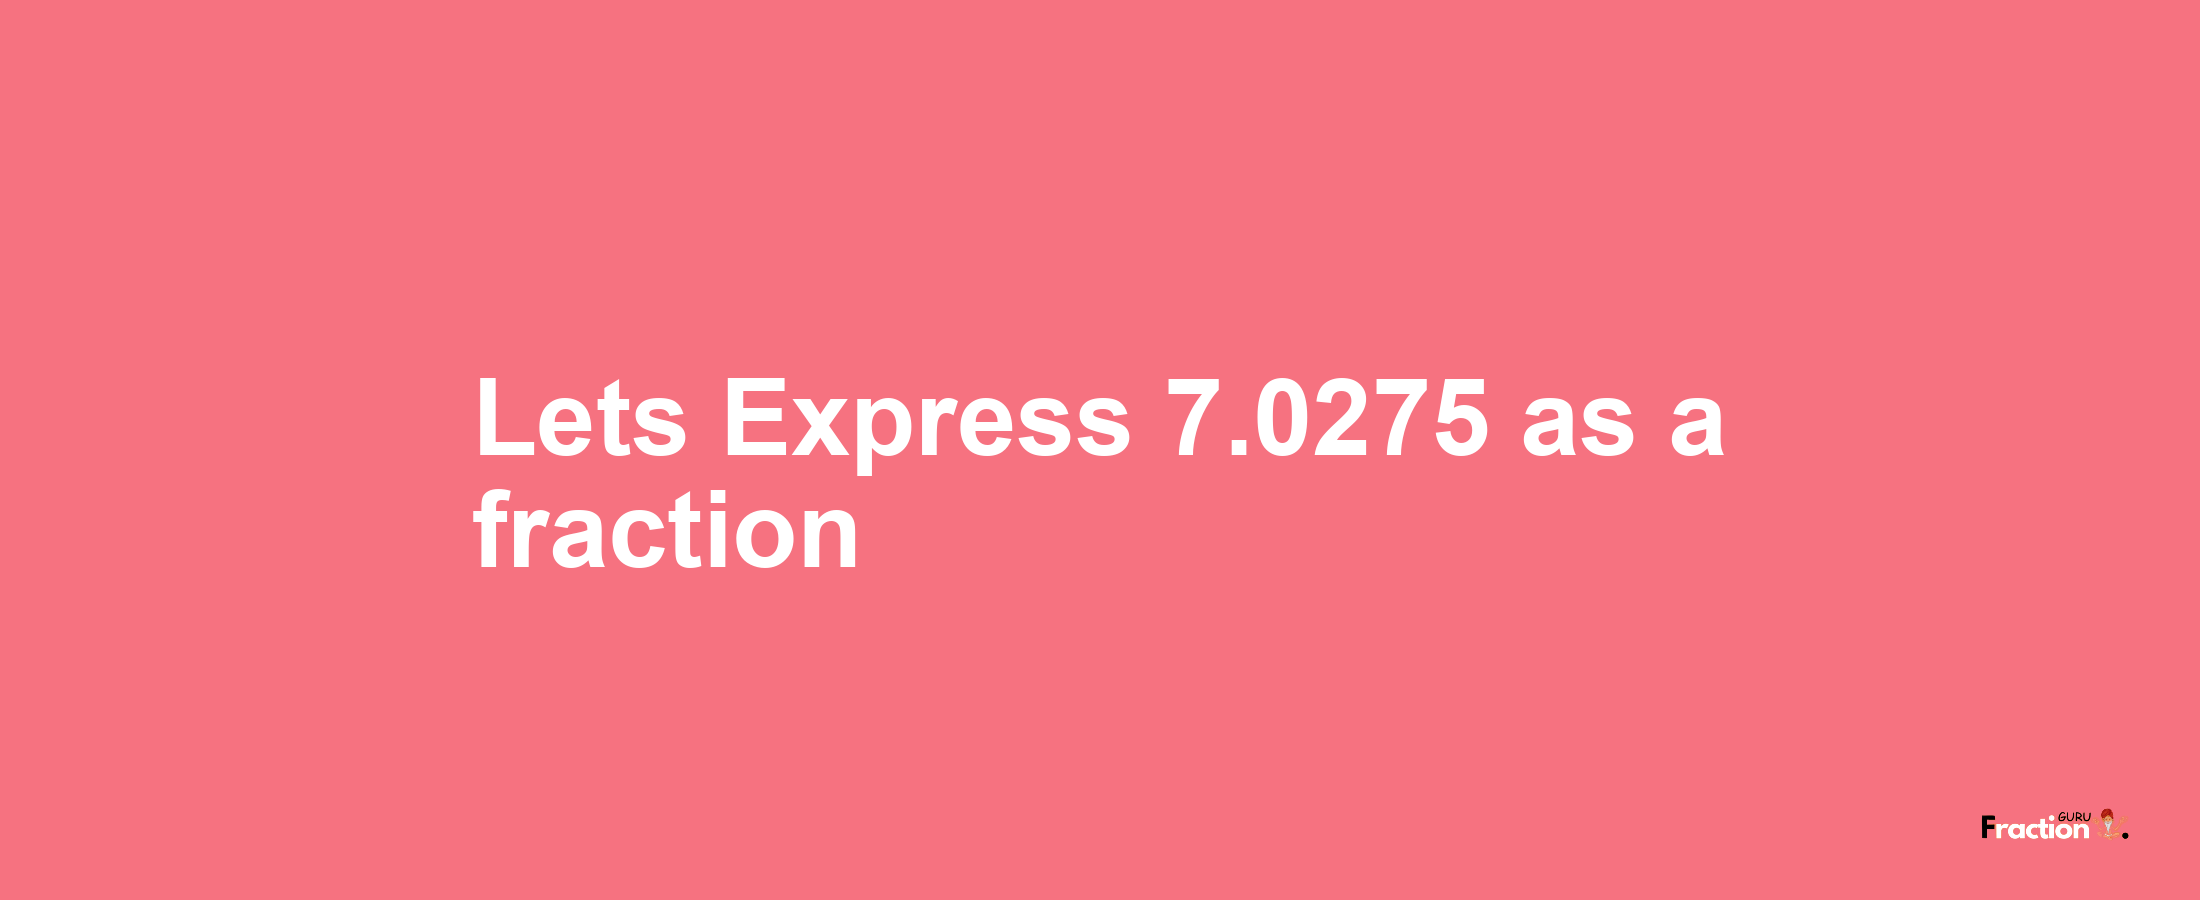 Lets Express 7.0275 as afraction